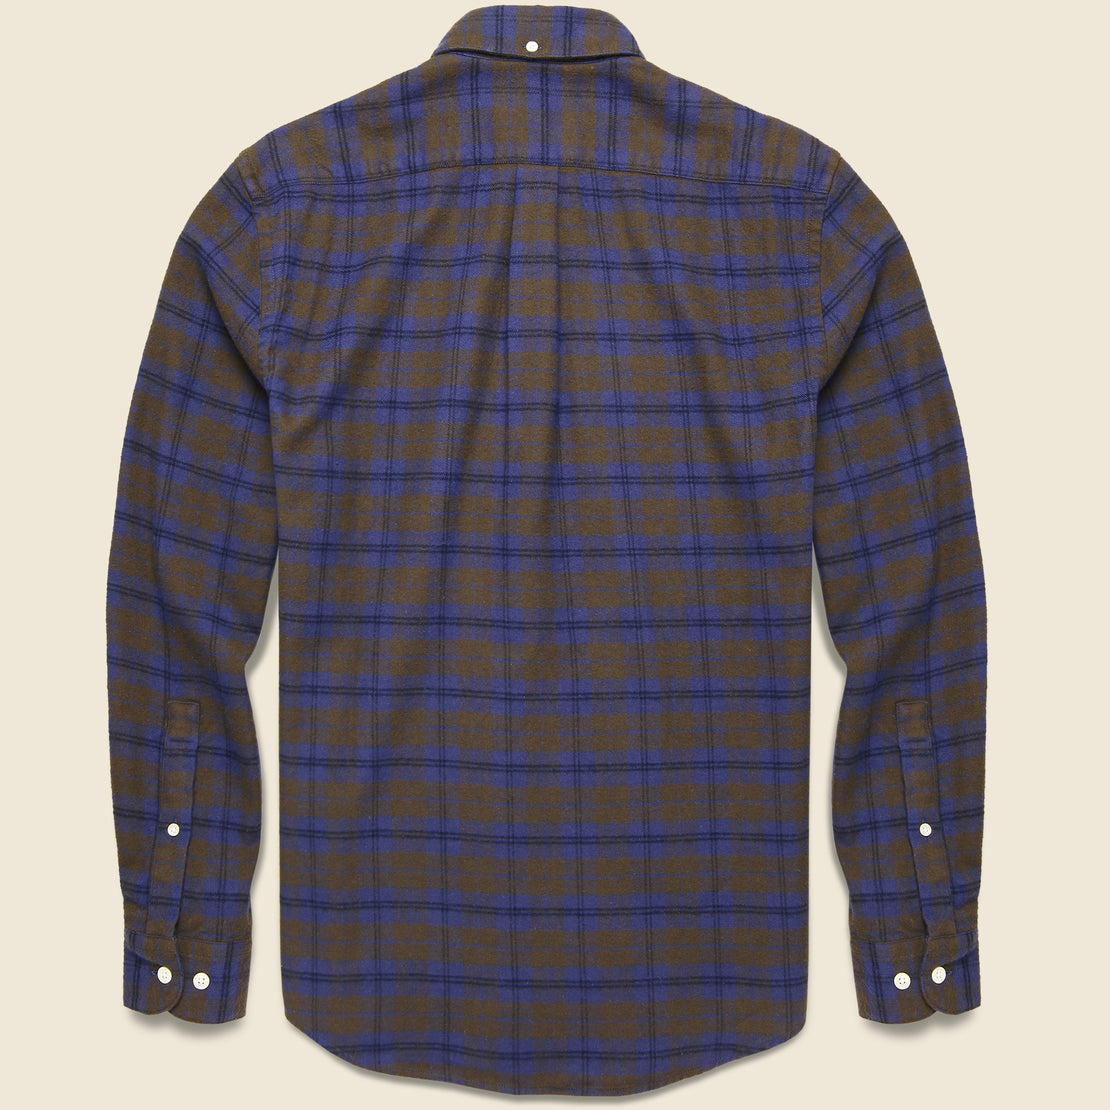 Visi Shirt - Brown - Portuguese Flannel - STAG Provisions - Tops - L/S Woven - Plaid